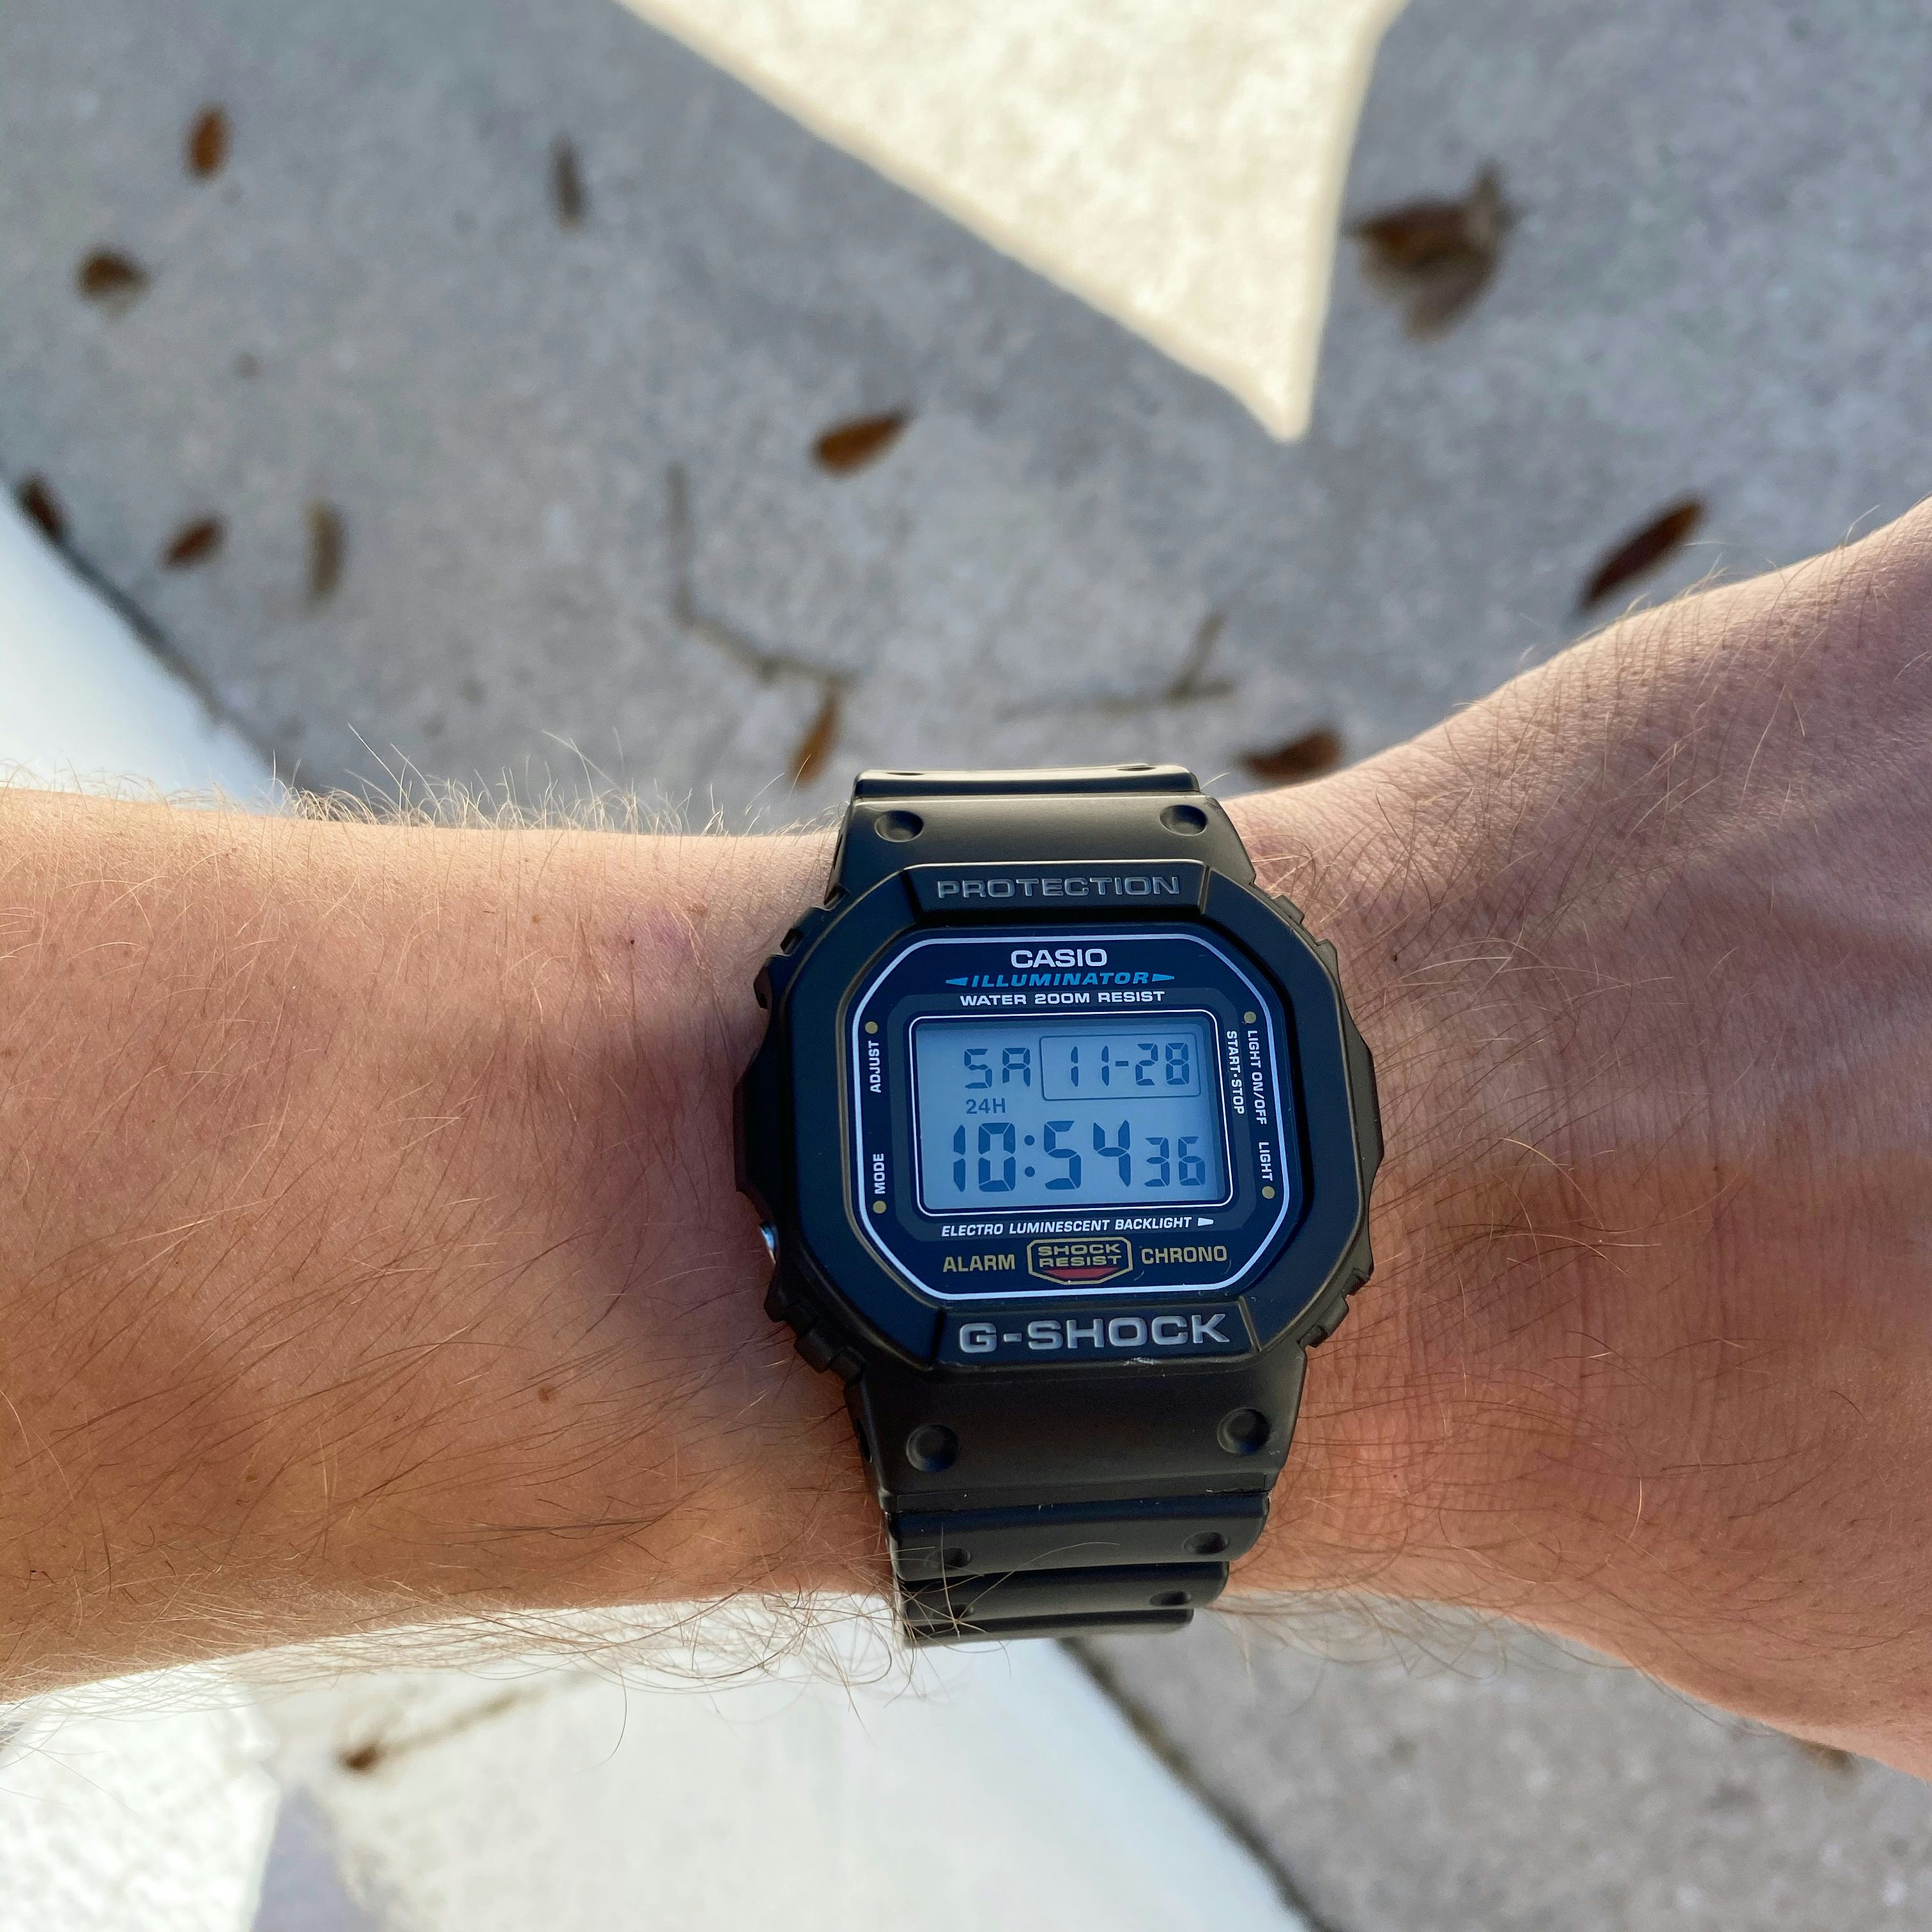 The DW-5600 and G-5600 are basically the the same watch, right?